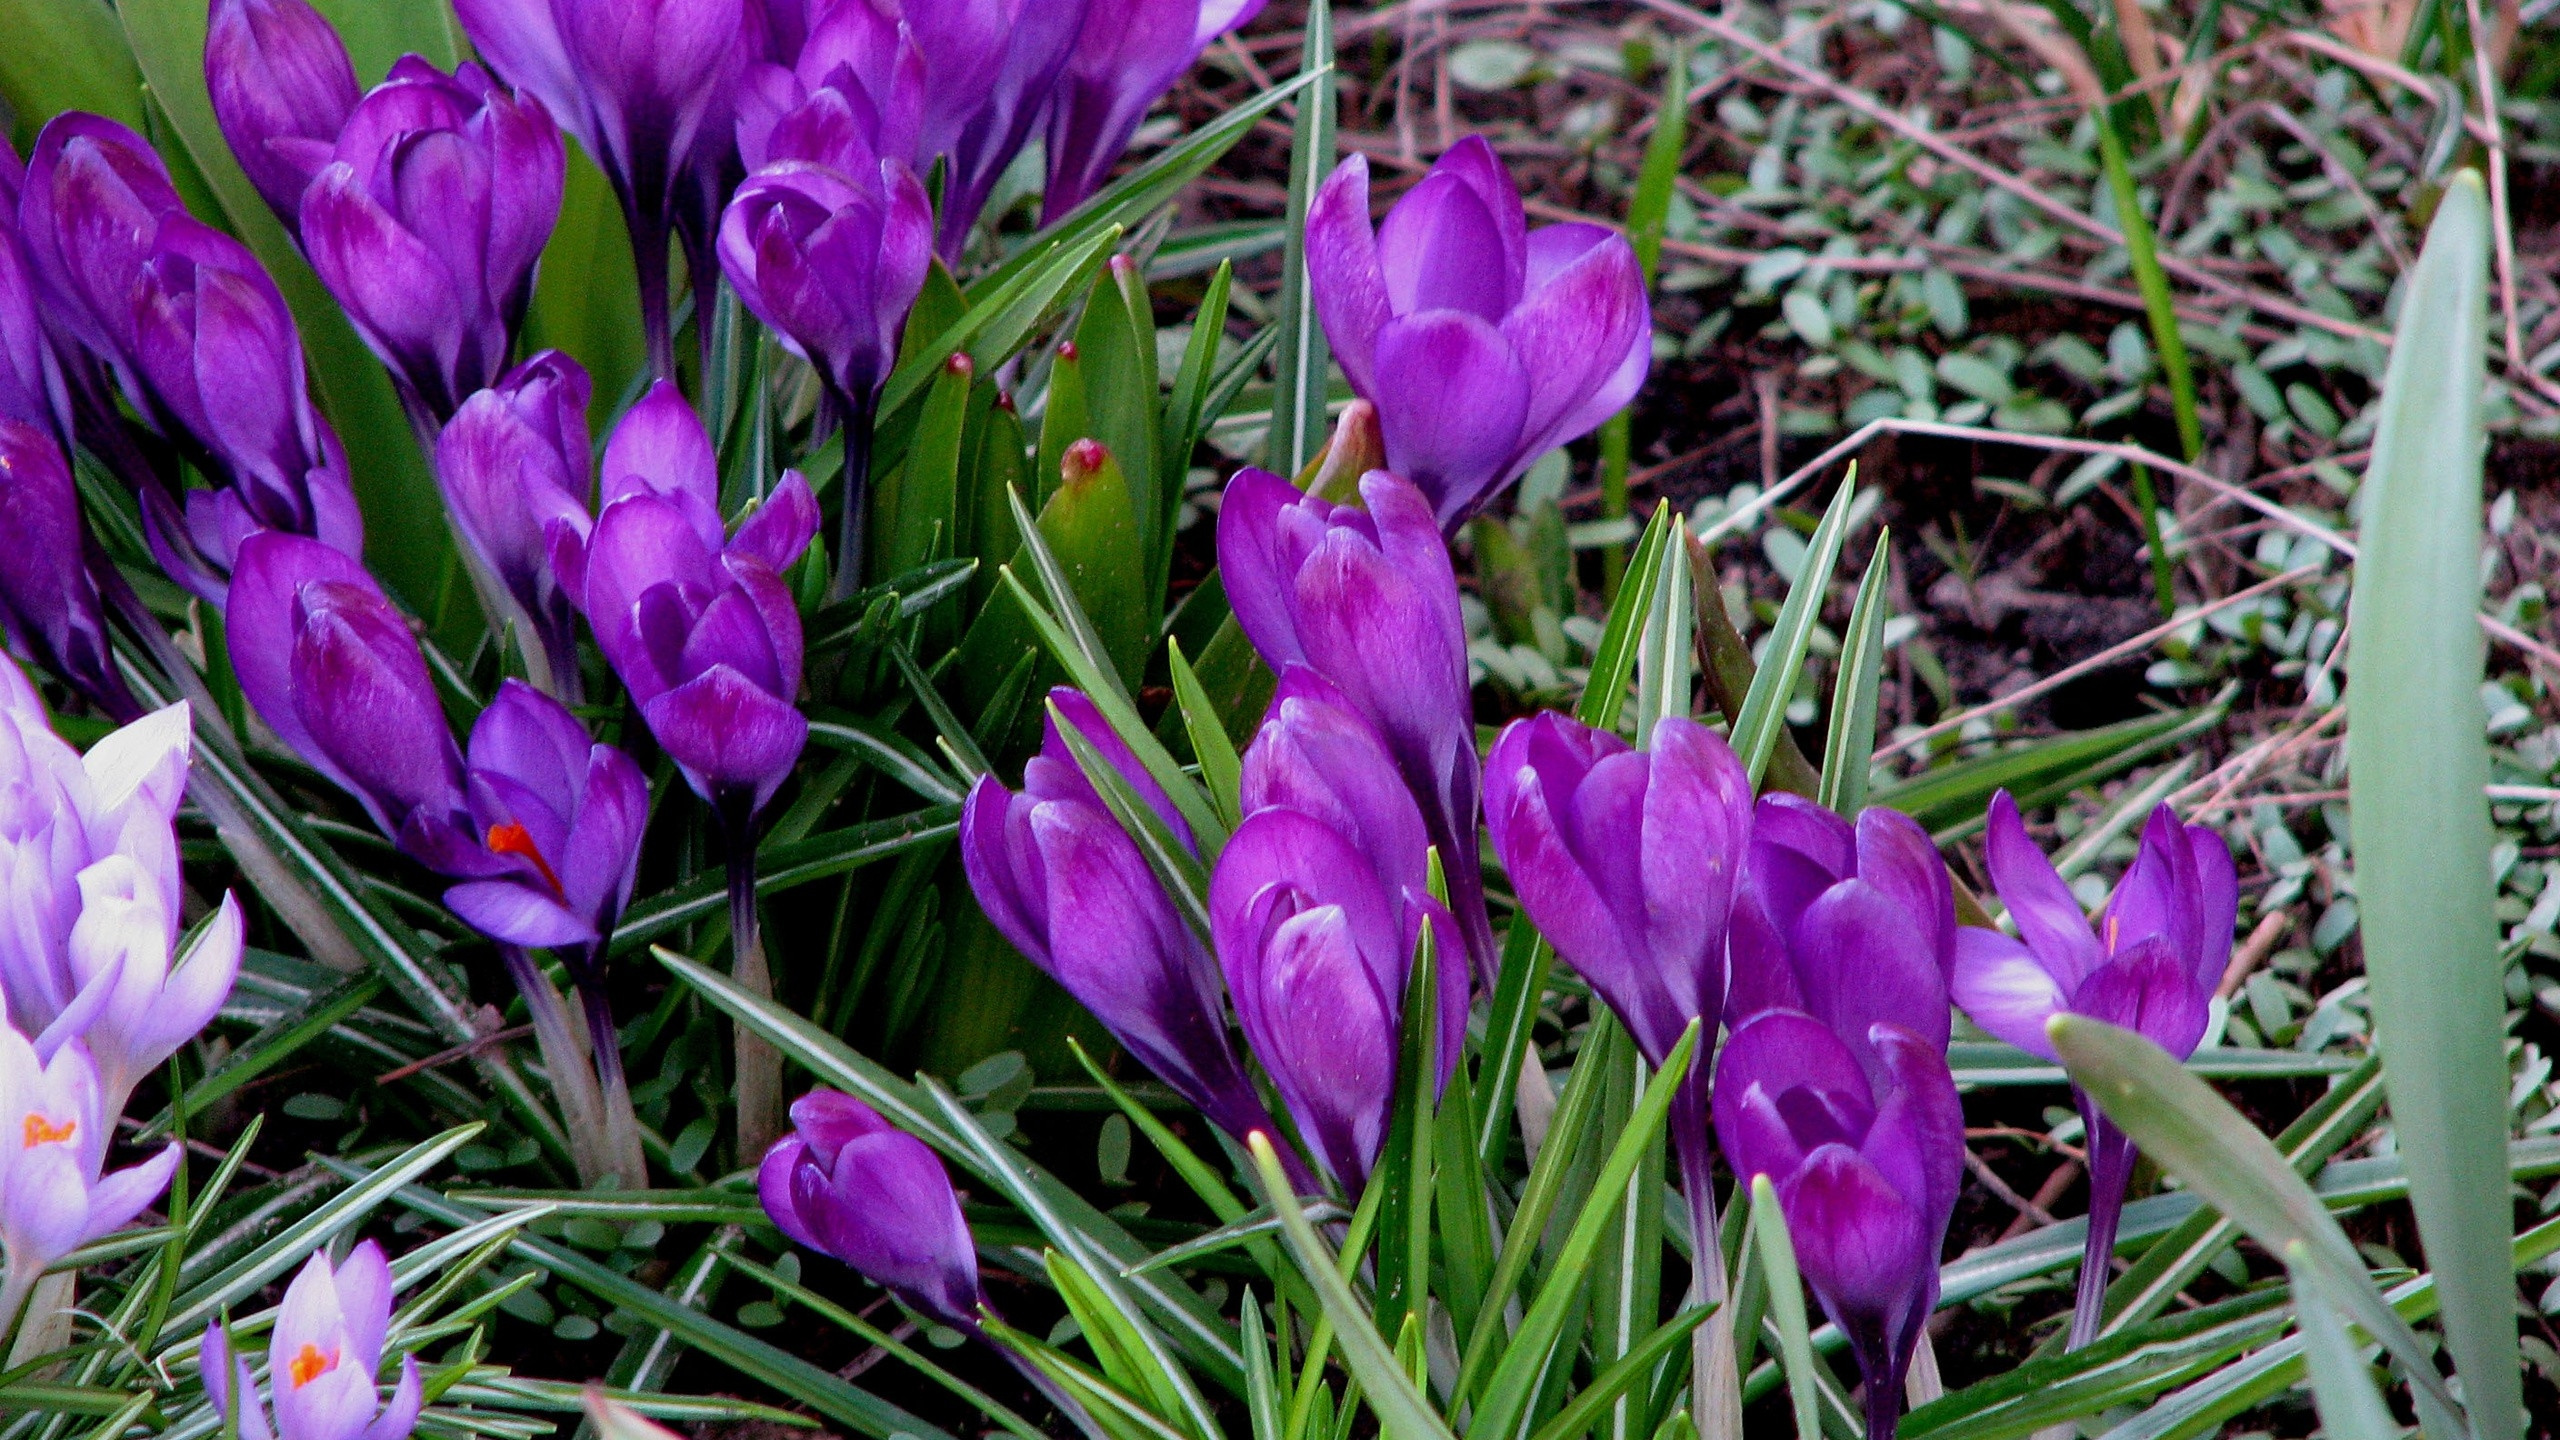 Purple Flowers on Green Grass During Daytime. Wallpaper in 2560x1440 Resolution